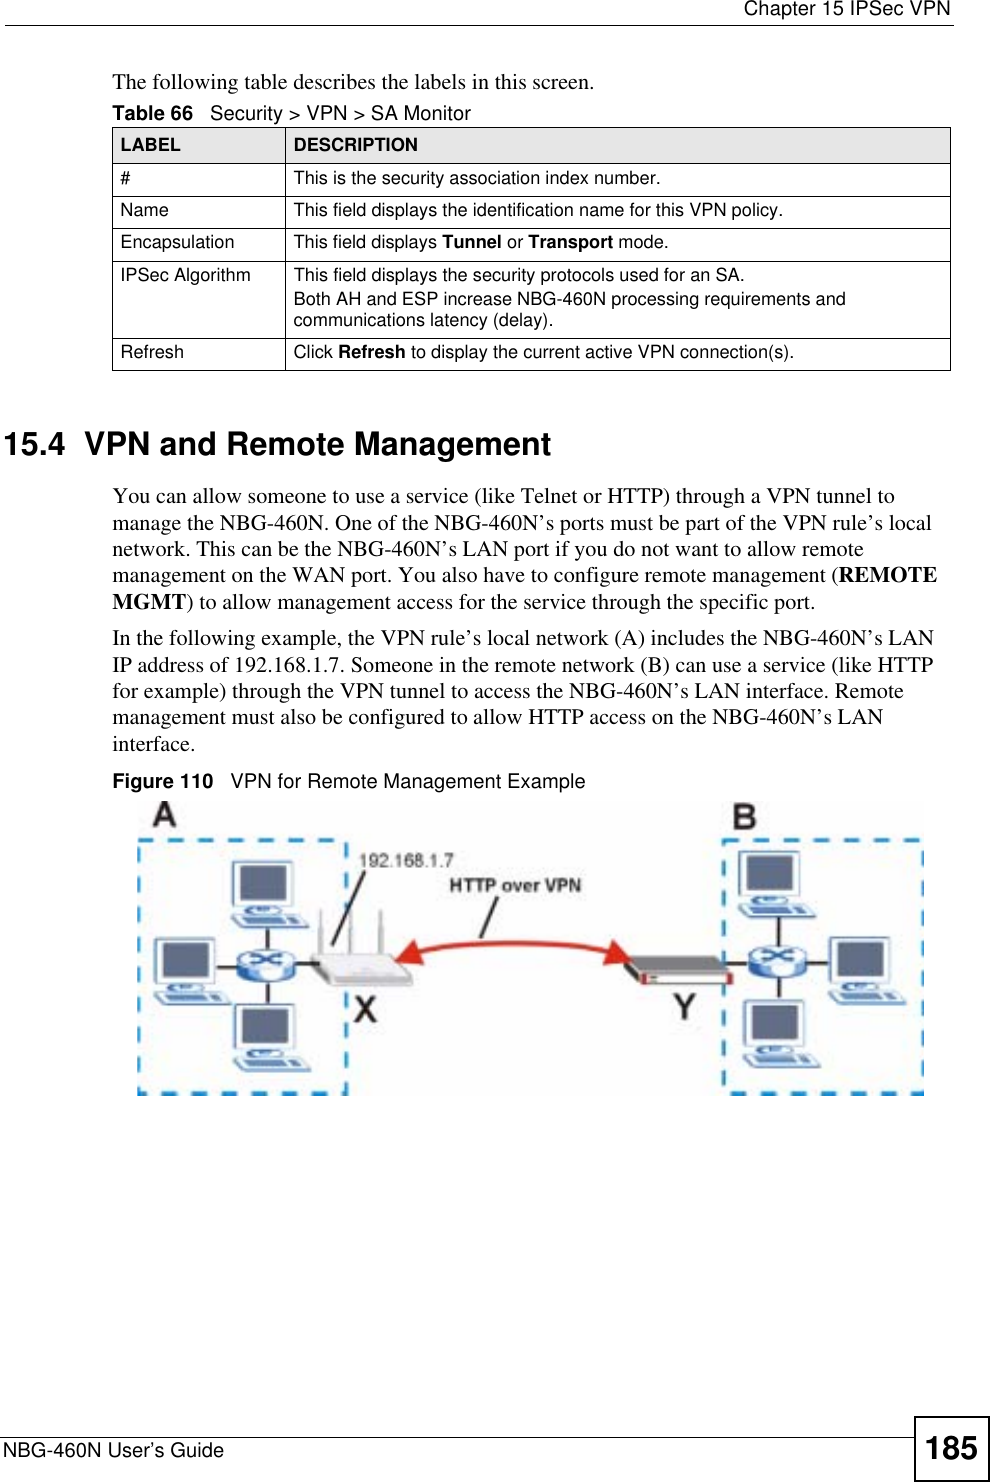  Chapter 15 IPSec VPNNBG-460N User’s Guide 185The following table describes the labels in this screen. 15.4  VPN and Remote ManagementYou can allow someone to use a service (like Telnet or HTTP) through a VPN tunnel to manage the NBG-460N. One of the NBG-460N’s ports must be part of the VPN rule’s local network. This can be the NBG-460N’s LAN port if you do not want to allow remote management on the WAN port. You also have to configure remote management (REMOTE MGMT) to allow management access for the service through the specific port. In the following example, the VPN rule’s local network (A) includes the NBG-460N’s LAN IP address of 192.168.1.7. Someone in the remote network (B) can use a service (like HTTP for example) through the VPN tunnel to access the NBG-460N’s LAN interface. Remote management must also be configured to allow HTTP access on the NBG-460N’s LAN interface.Figure 110   VPN for Remote Management ExampleTable 66   Security &gt; VPN &gt; SA MonitorLABEL DESCRIPTION# This is the security association index number. Name This field displays the identification name for this VPN policy.Encapsulation This field displays Tunnel or Transport mode.IPSec Algorithm This field displays the security protocols used for an SA.Both AH and ESP increase NBG-460N processing requirements and communications latency (delay).Refresh Click Refresh to display the current active VPN connection(s). 